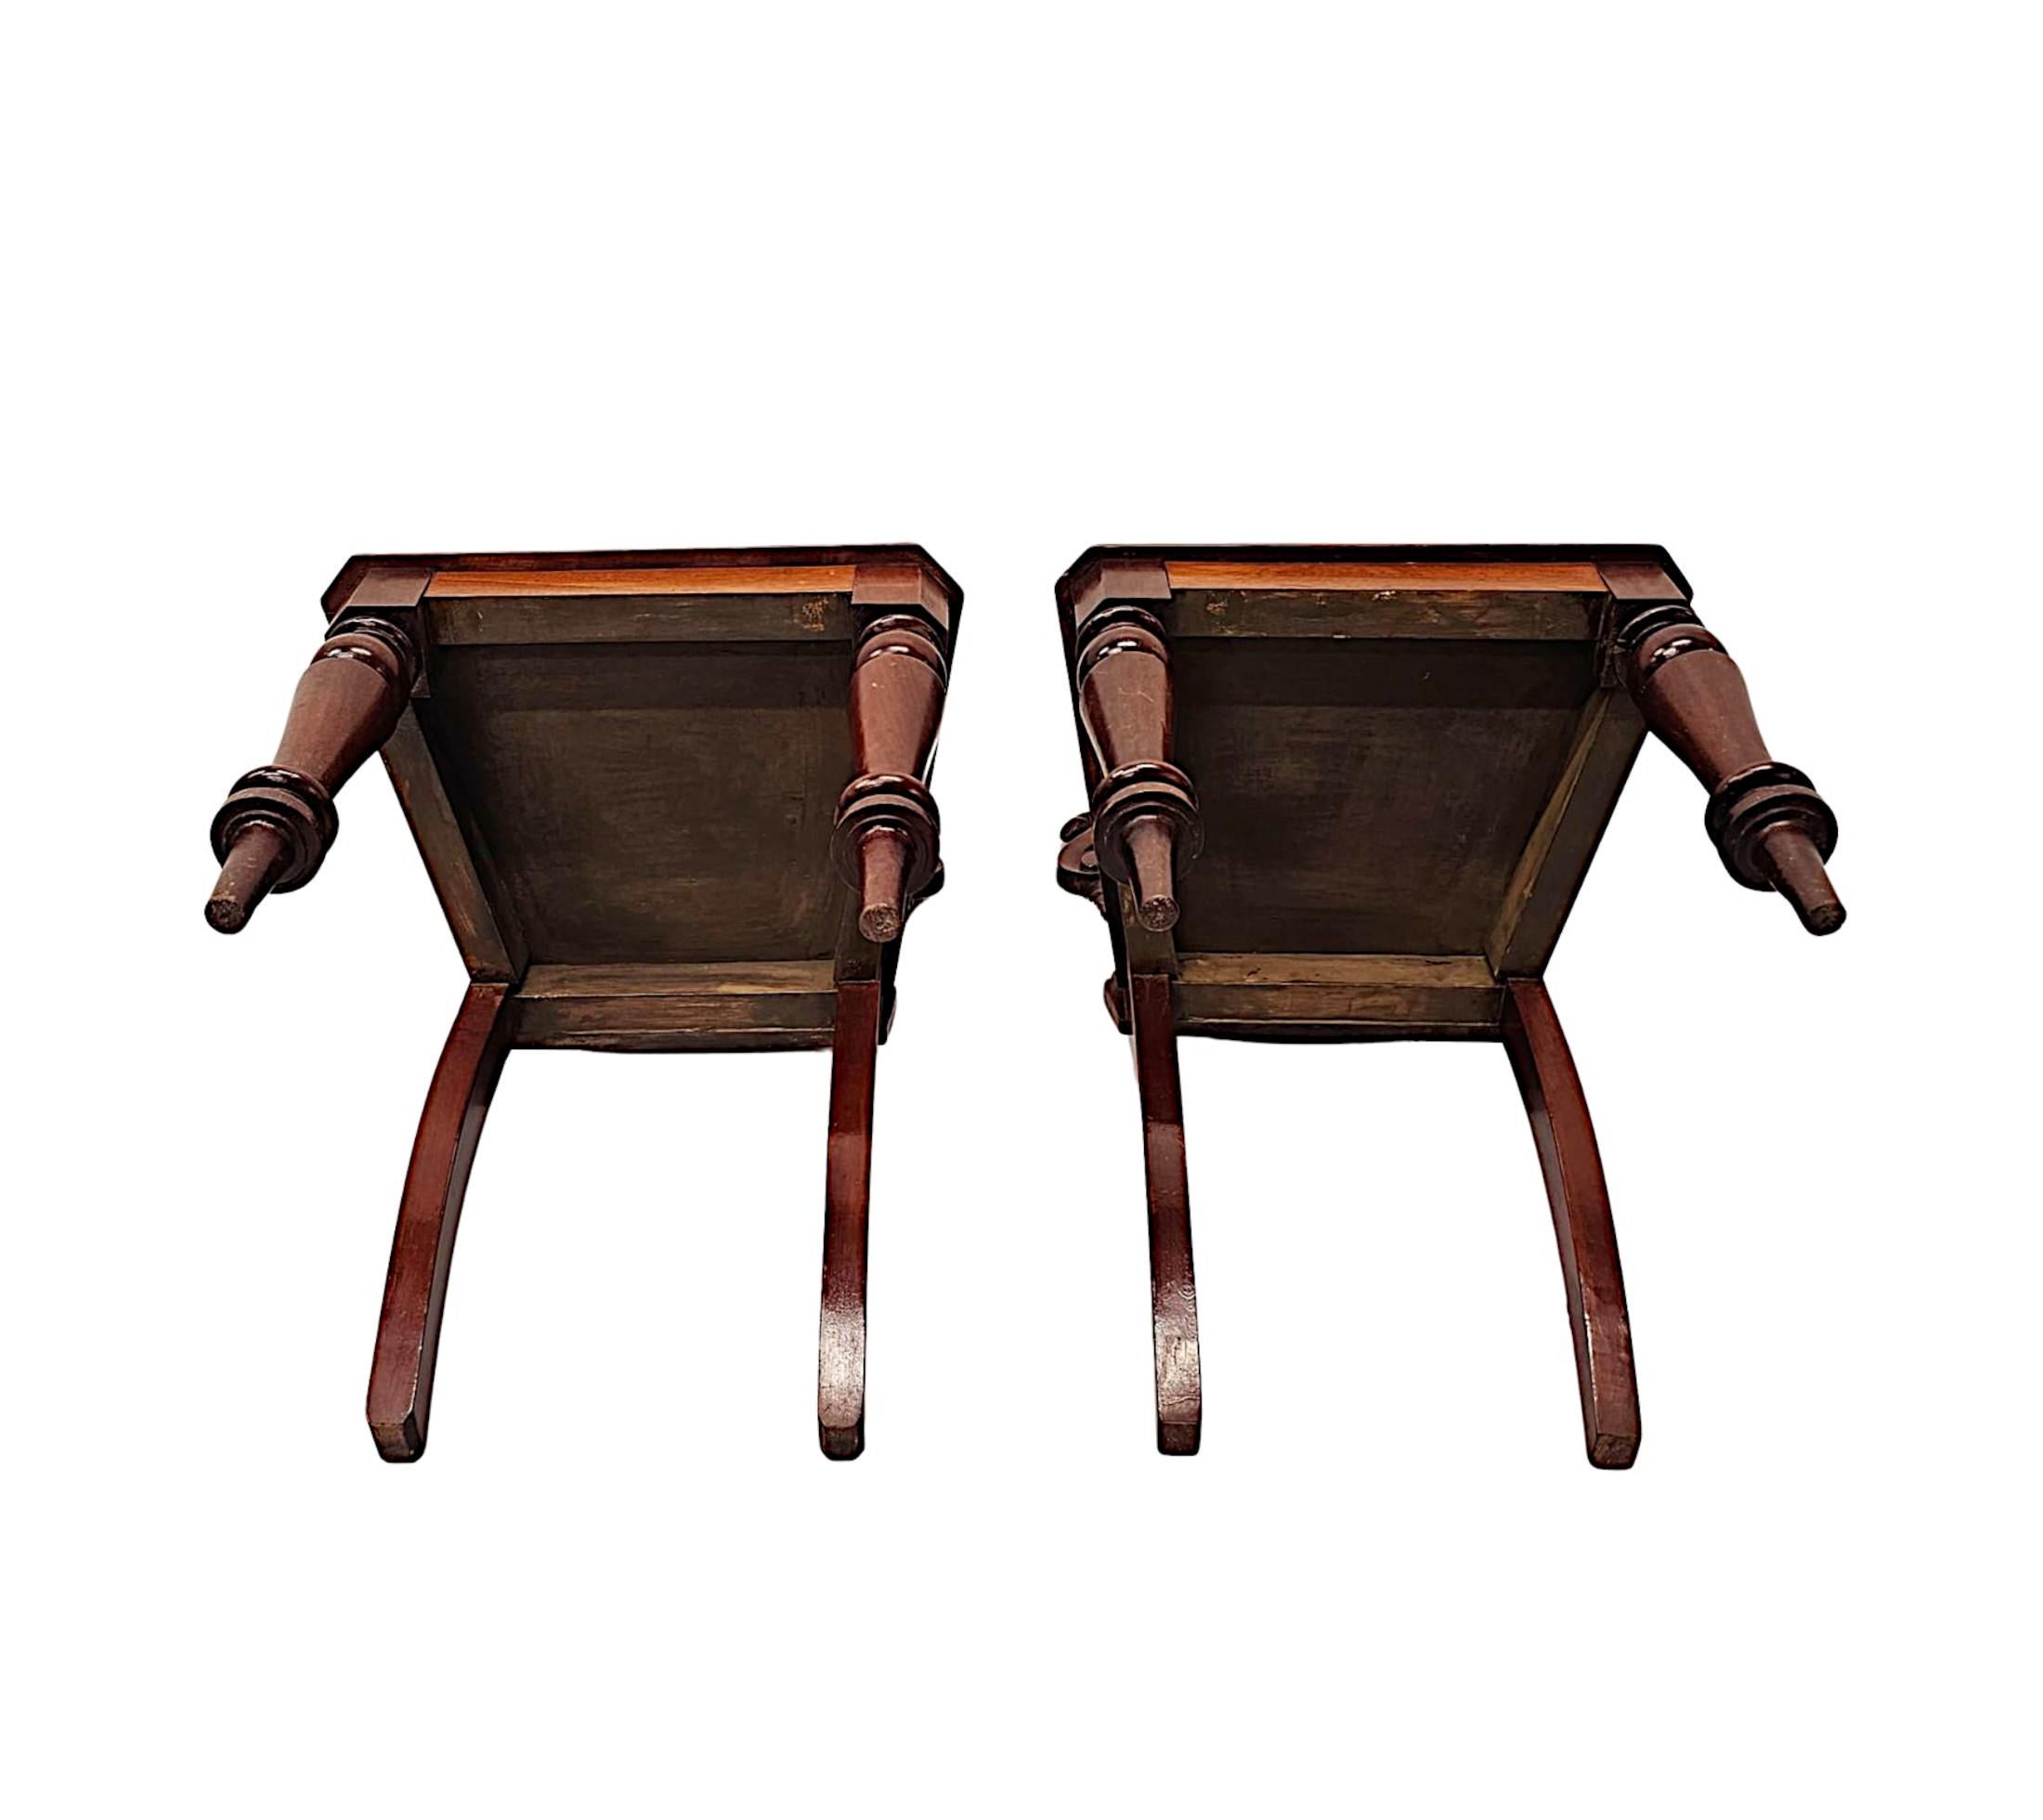 A Very Fine Pair of 19th Century Mahogany Hall Chairs For Sale 2